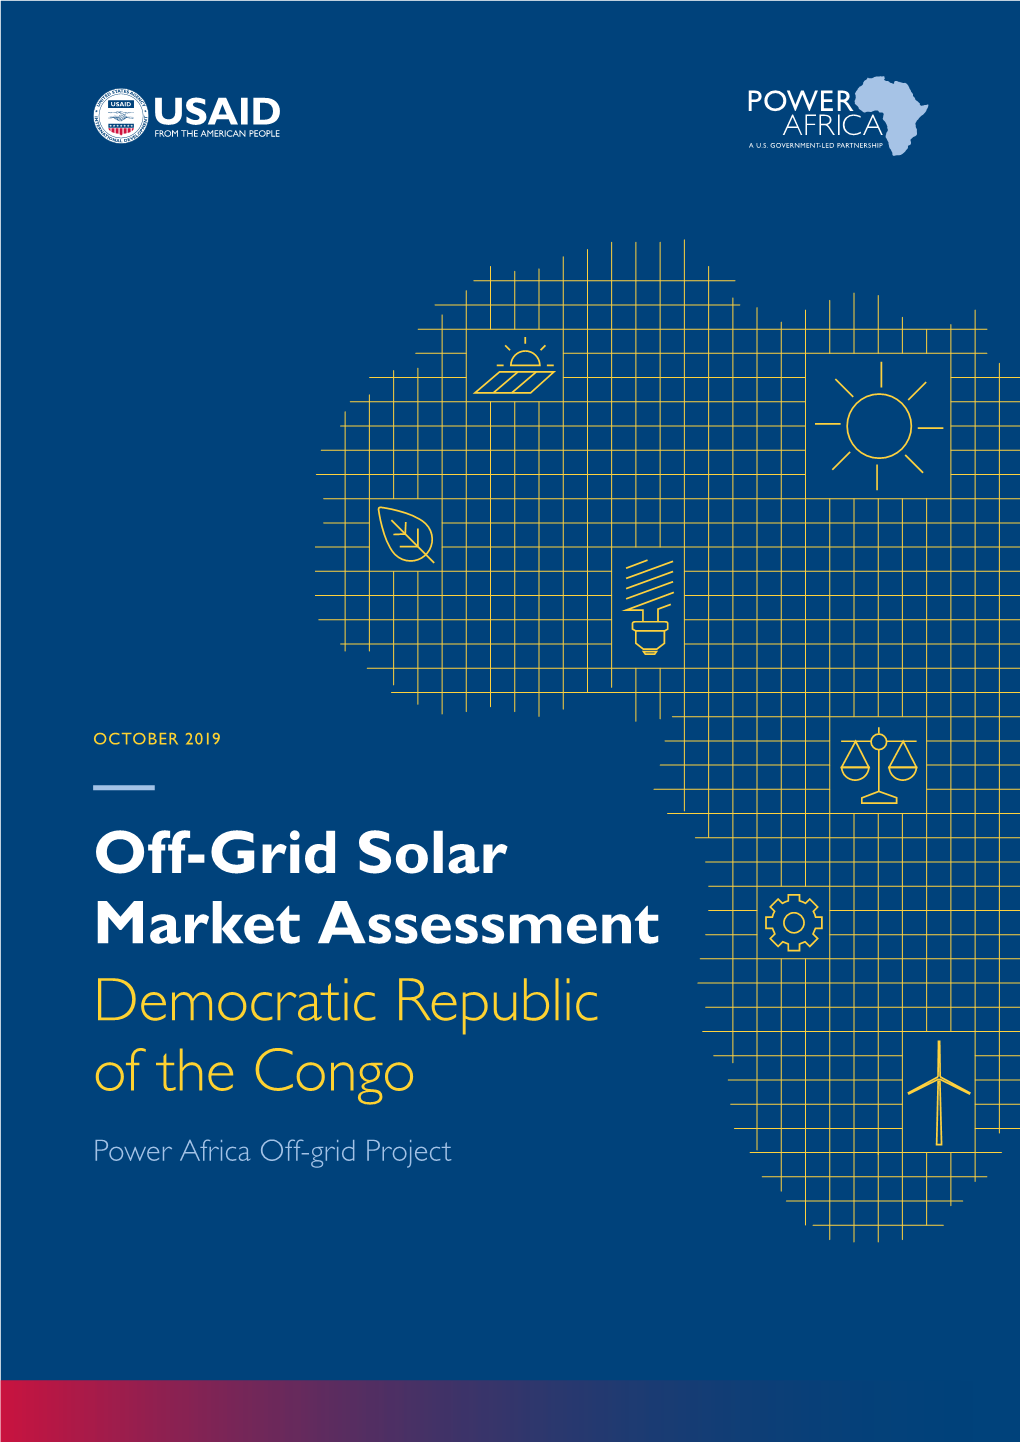 Off-Grid Solar Market Assessment Democratic Republic of the Congo Power Africa Off-Grid Project ABOUT POWER AFRICA